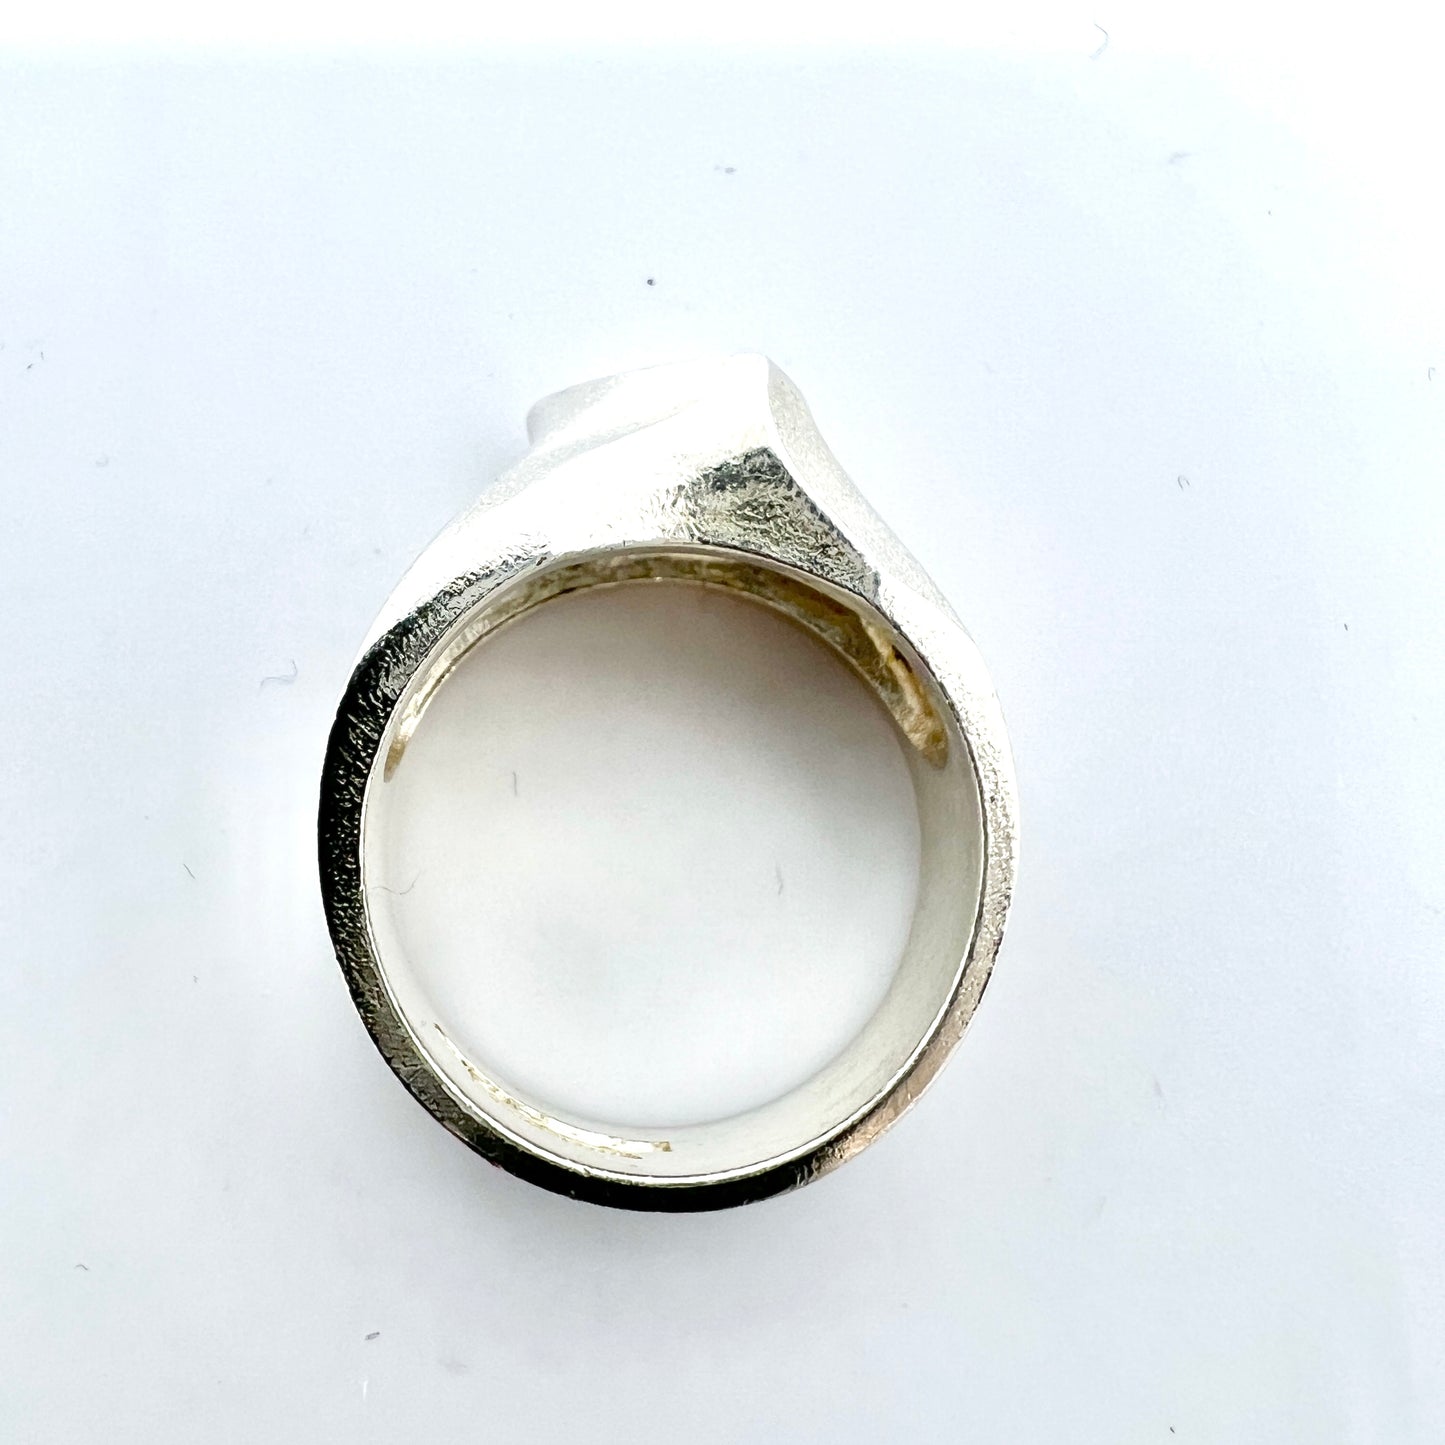 Bjorn Weckstrom for Lapponia, Finland 1978. Vintage Sterling Silver Ring.